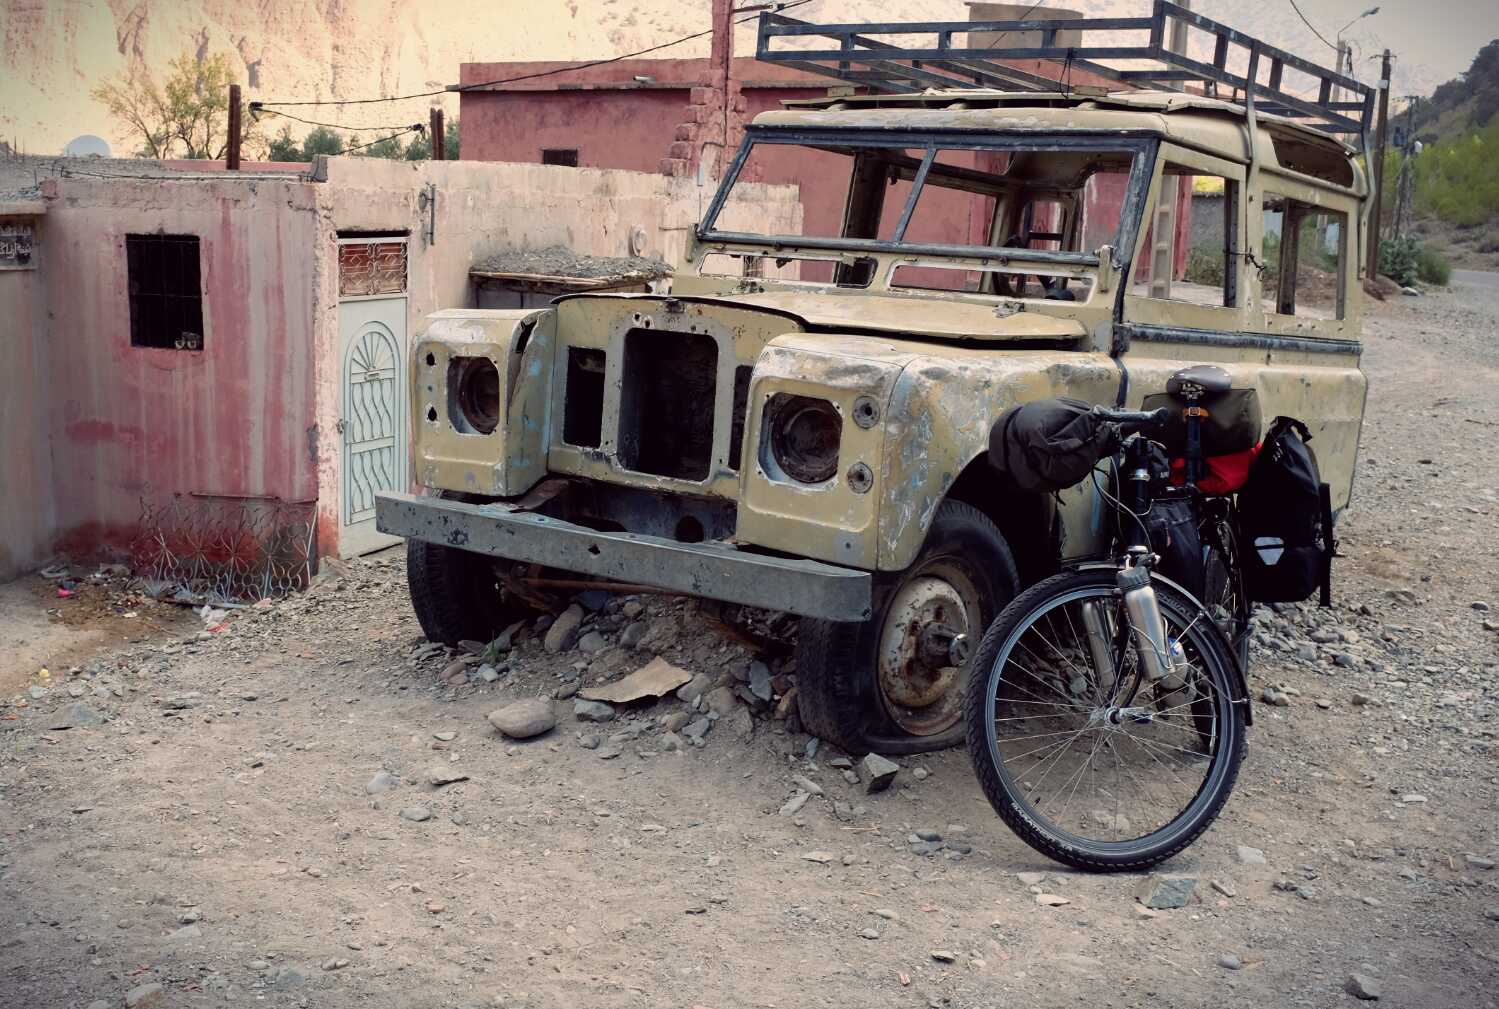 This poor old land rover had seen better days.